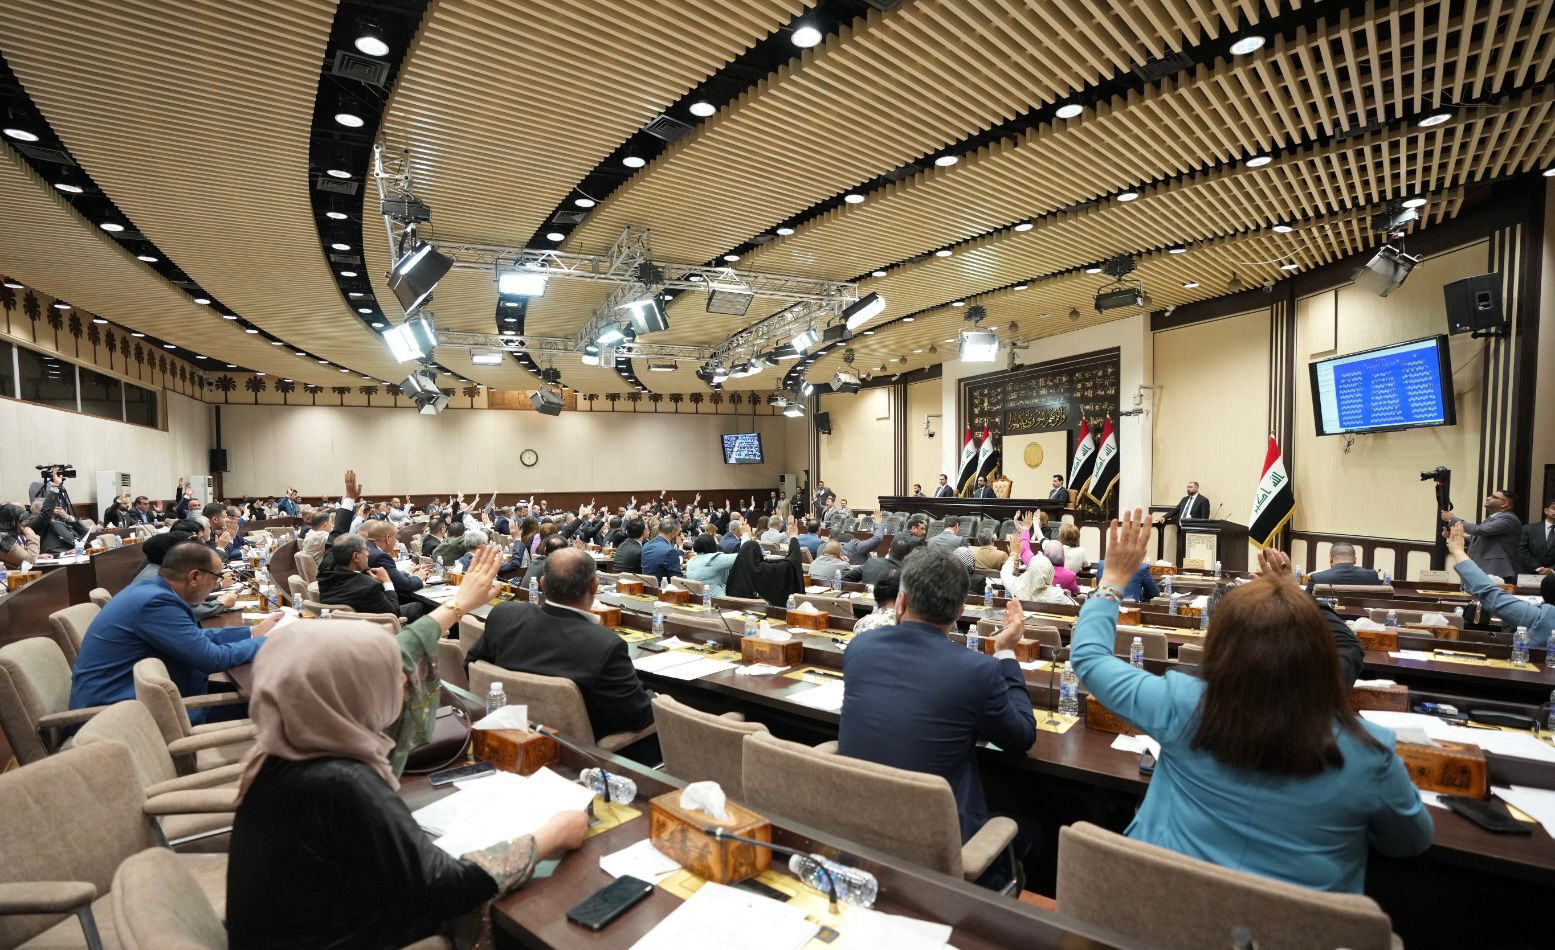 Postponing the parliament session to vote on the budget until the evening